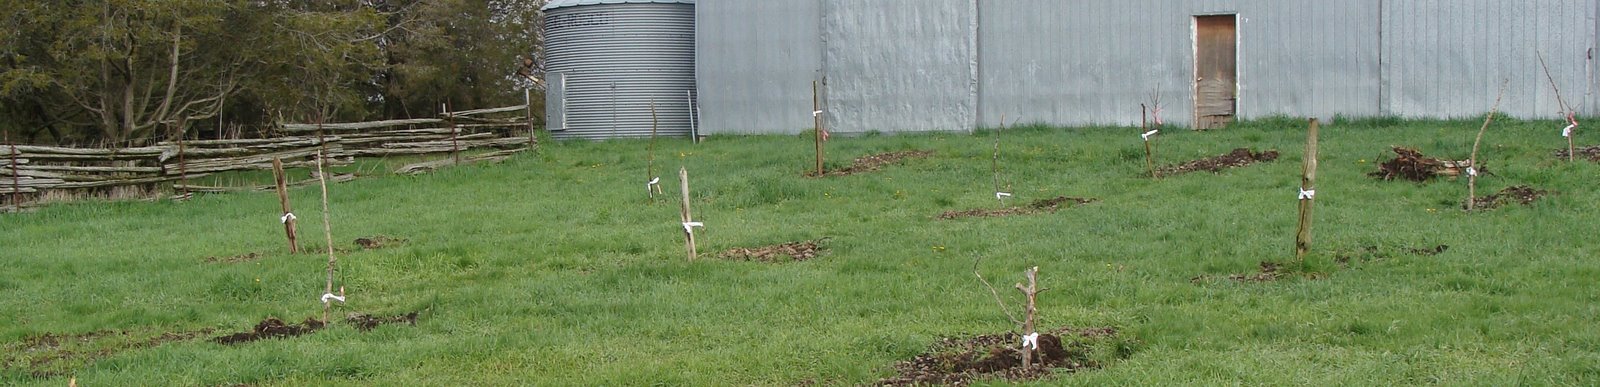 Orchard, the day after planting, 4 May 2008